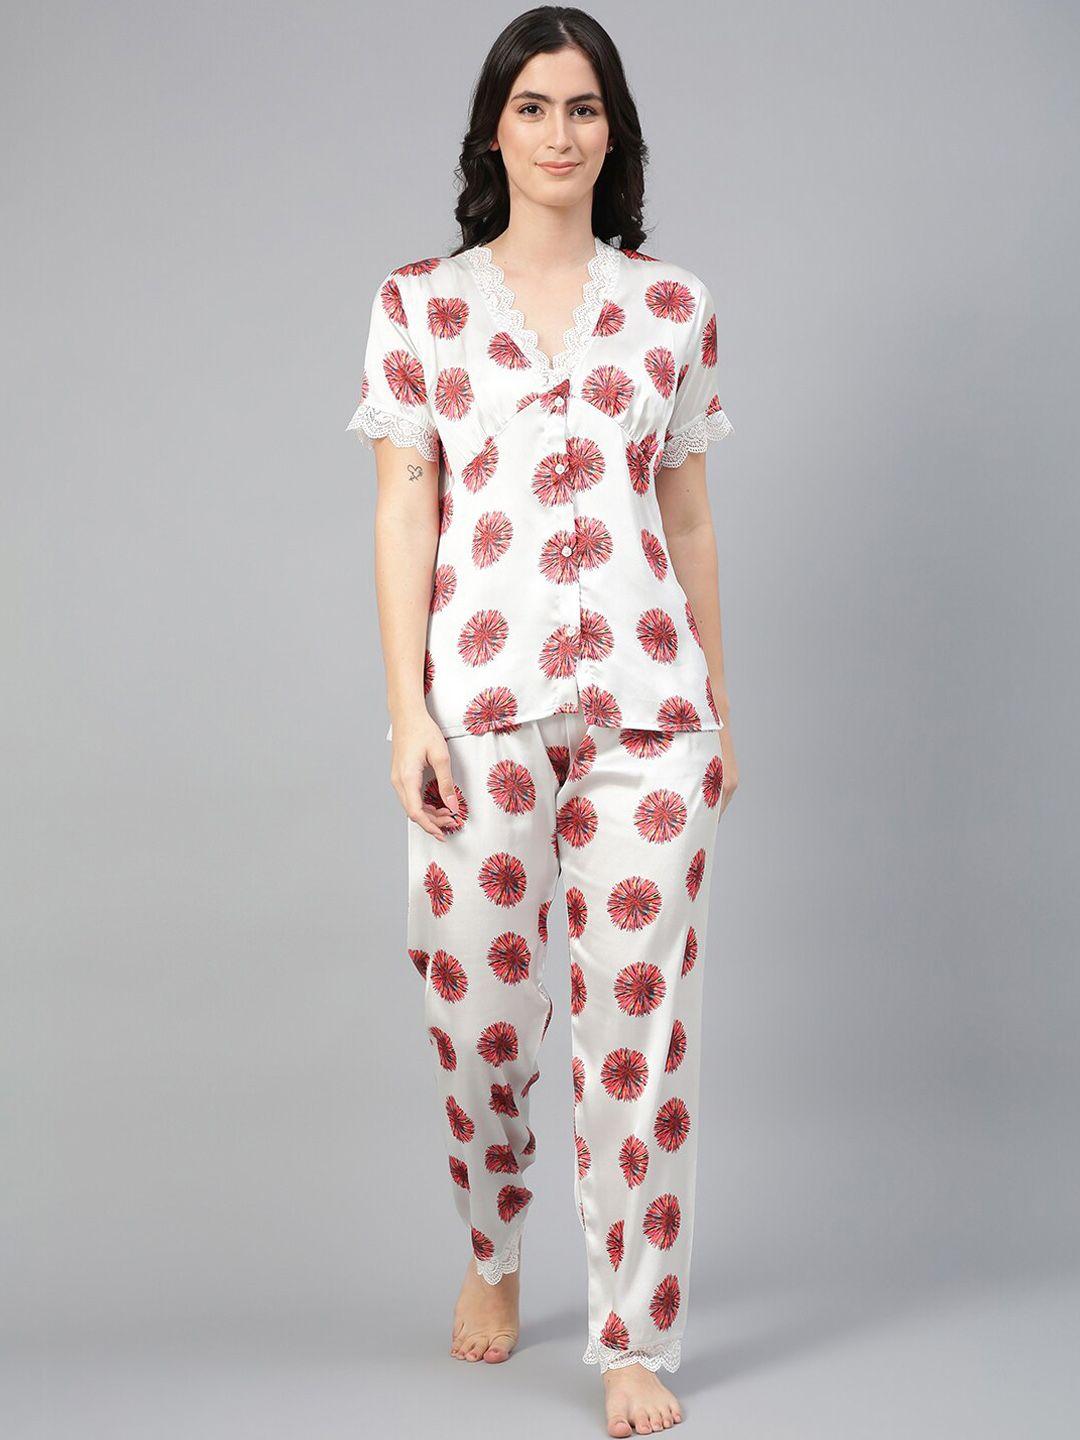 kotty white & red floral printed satin night suit